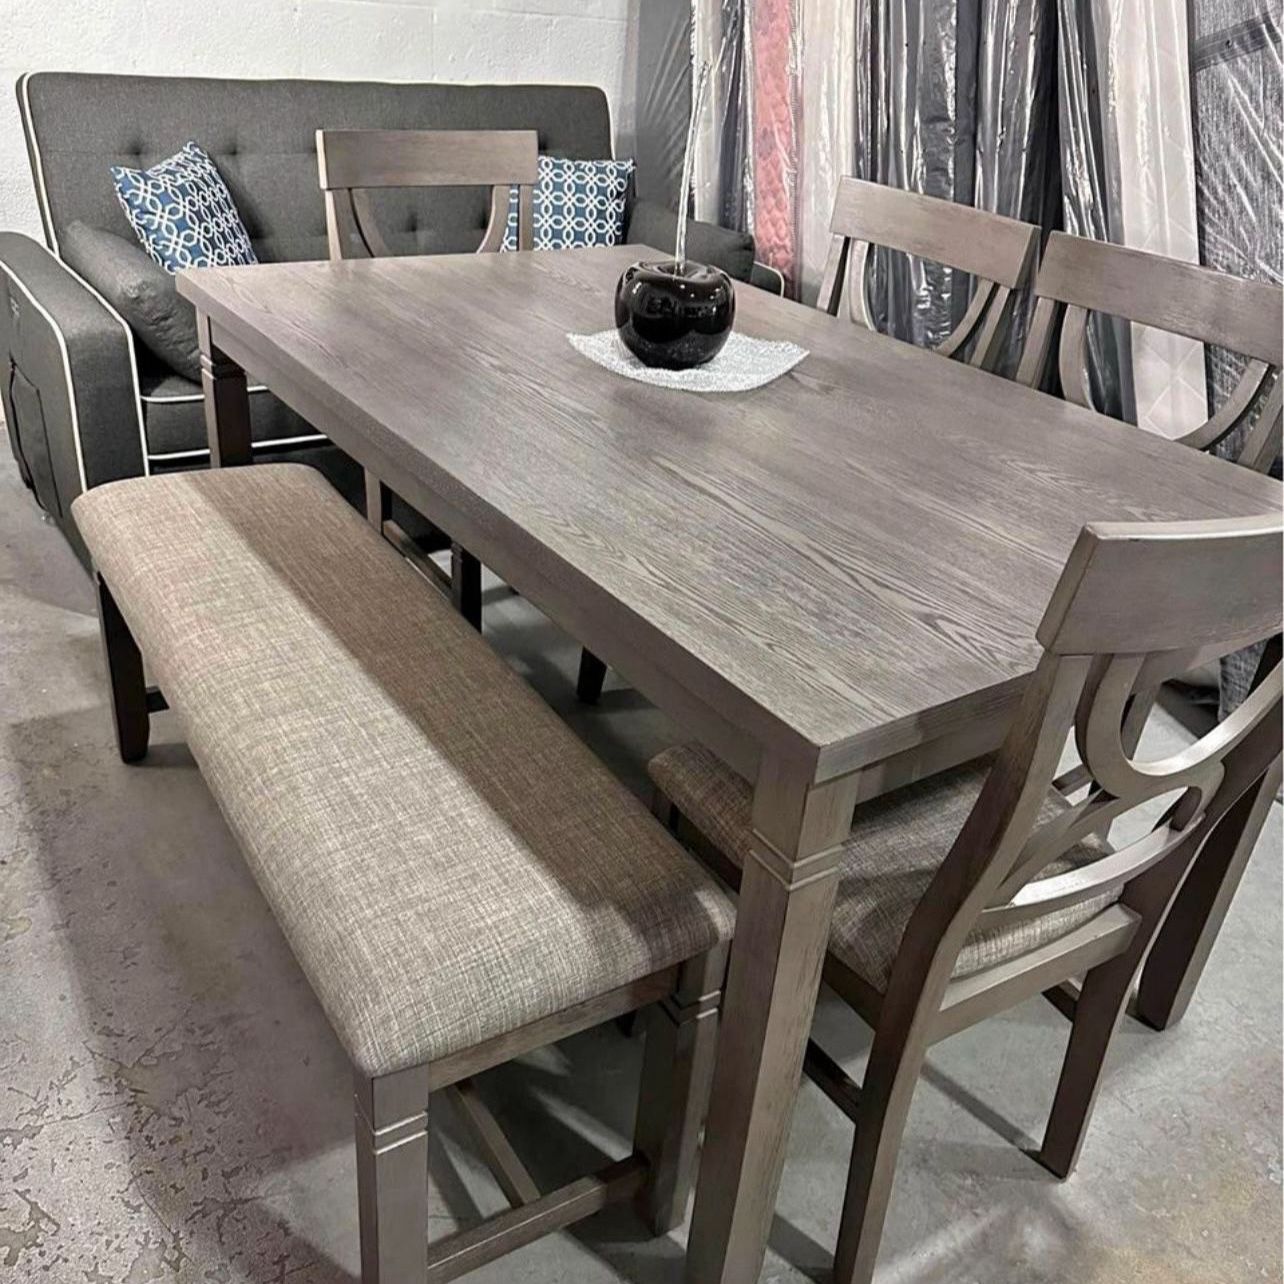 Brand New Dining Set- Flexible Payment Options Available $39 Down